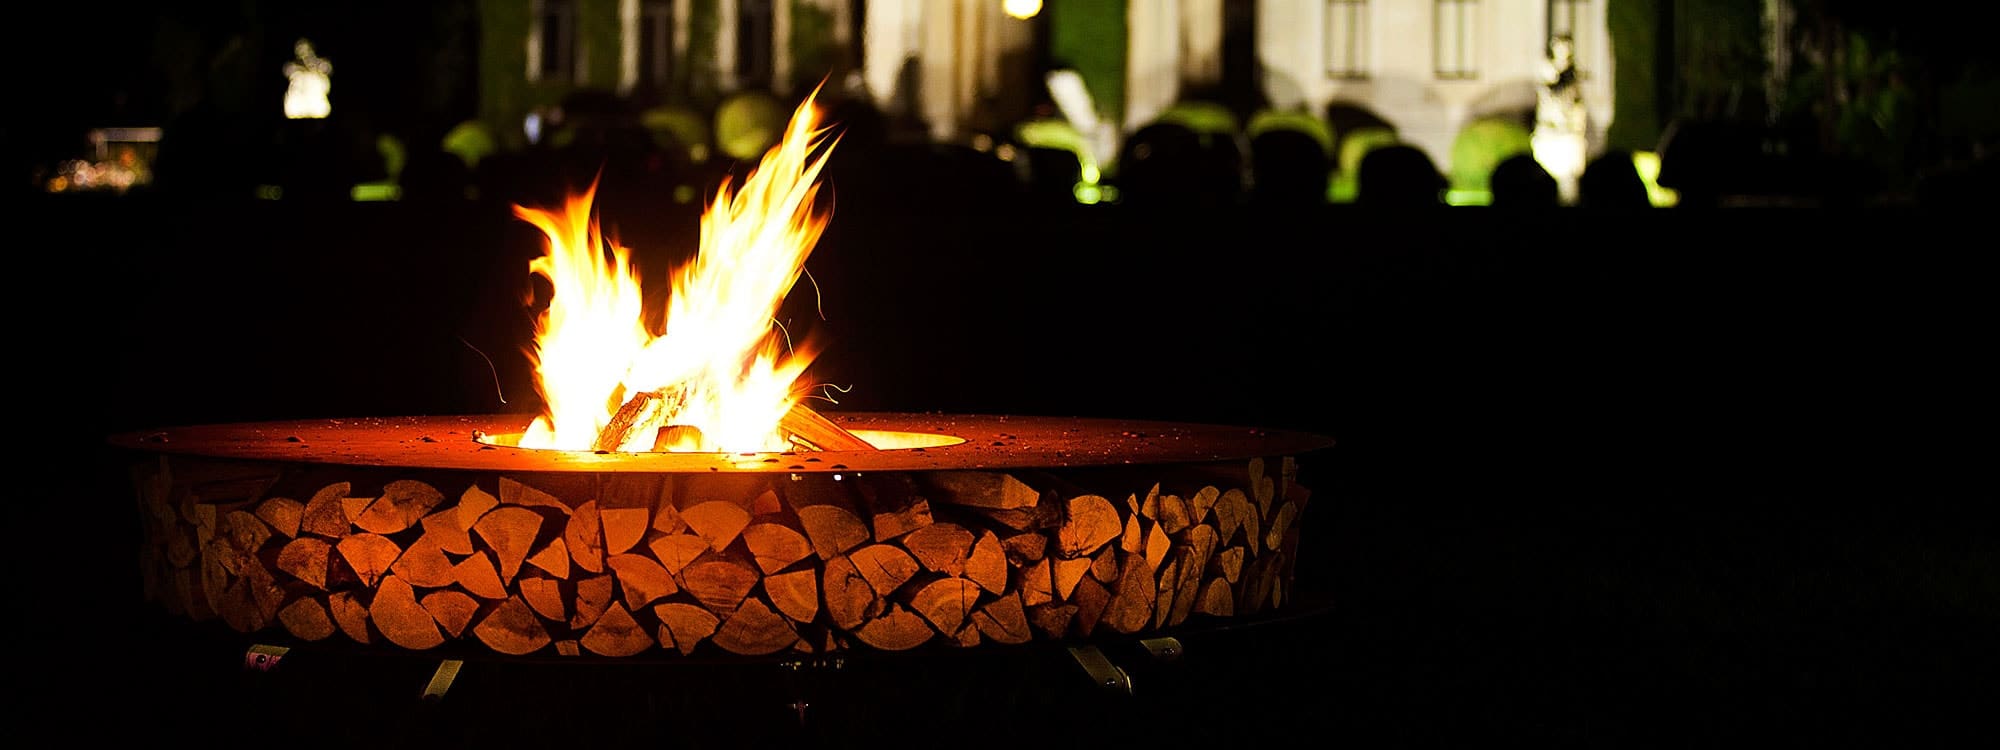 Image showing round shaped fire pit at night time